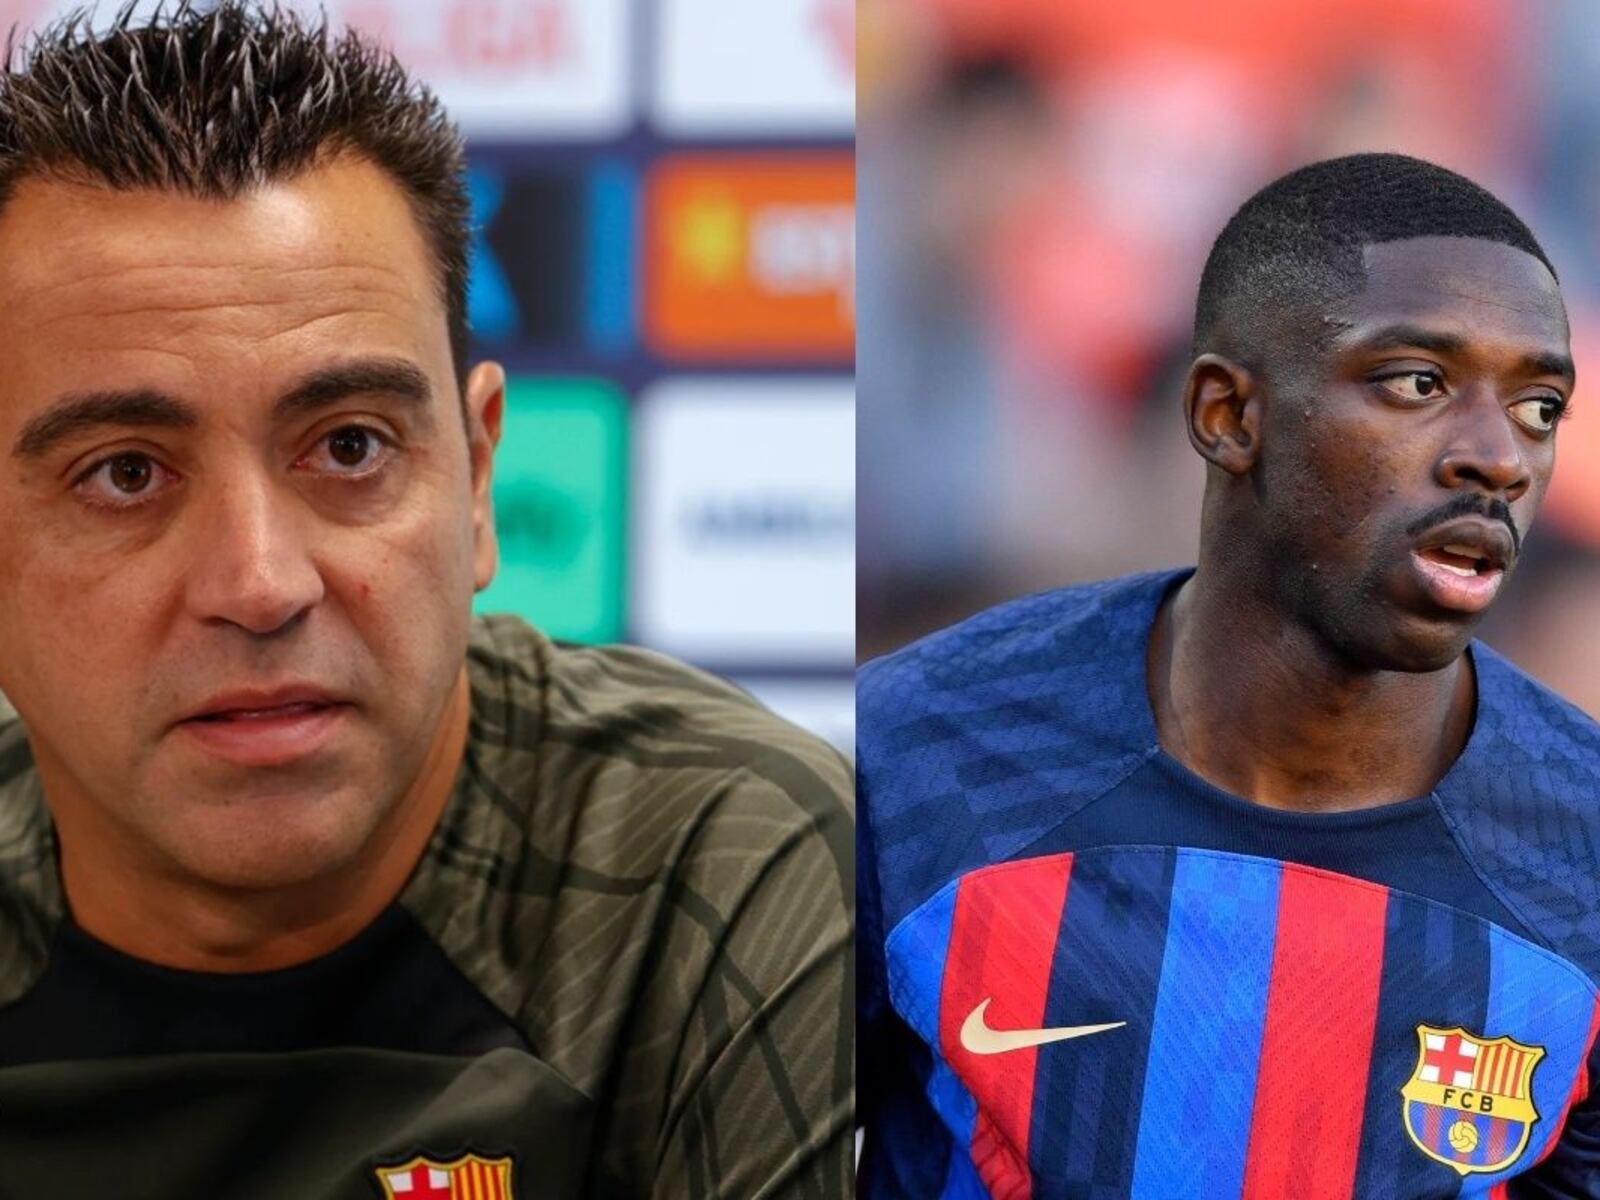 He did not recommend him due to conflicts, the player to whom Dembélé said no